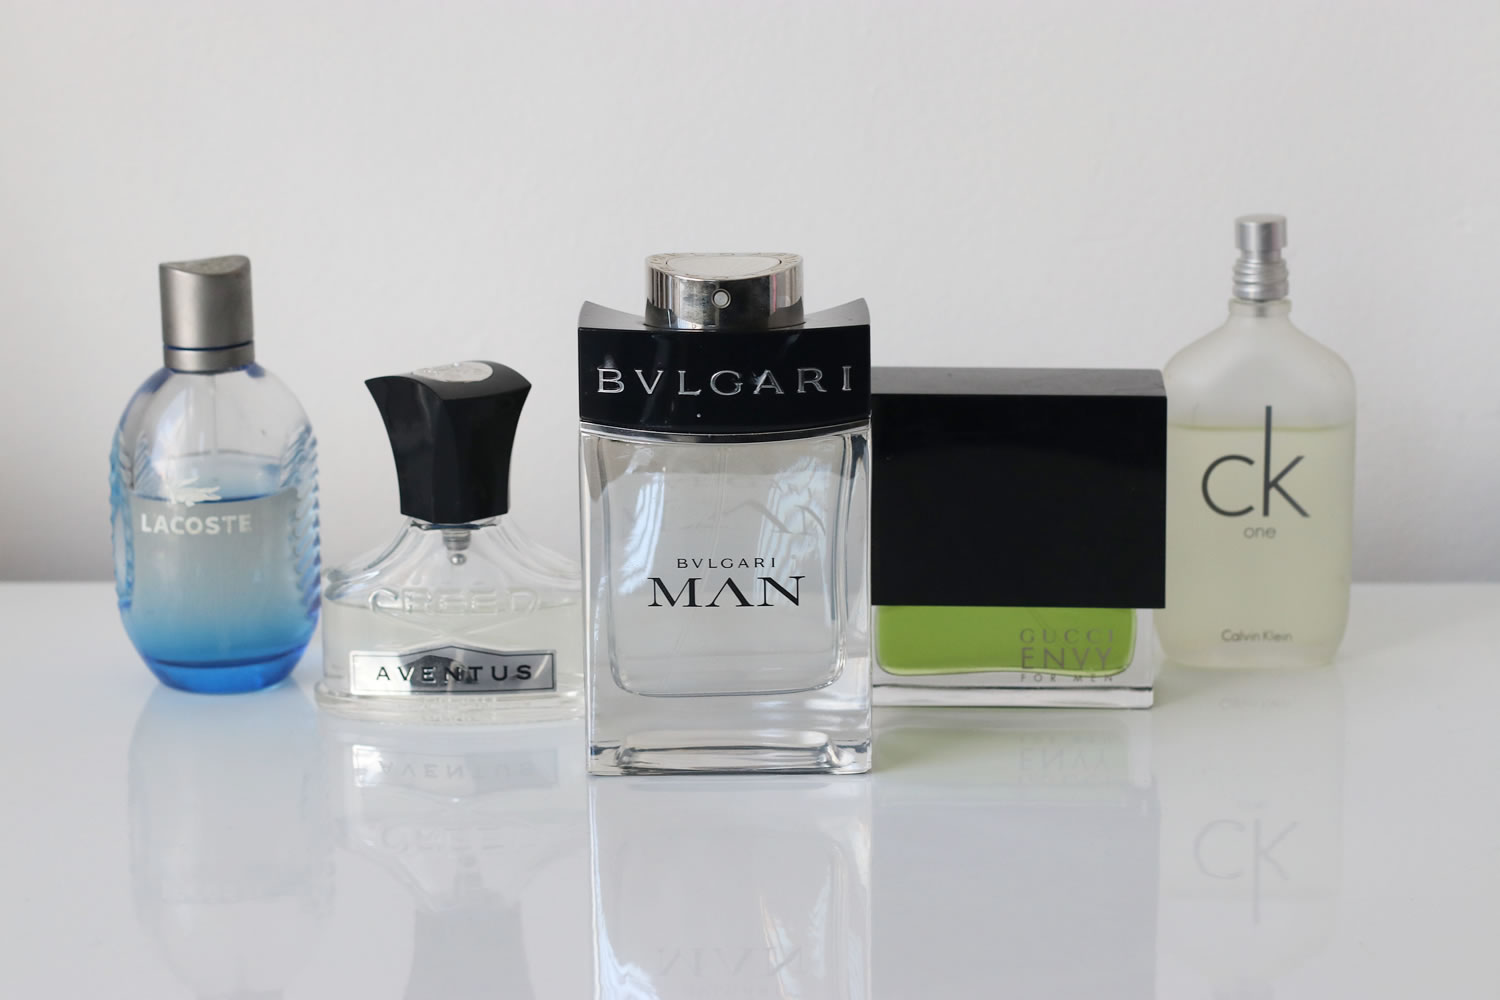 My favourite scents for spring